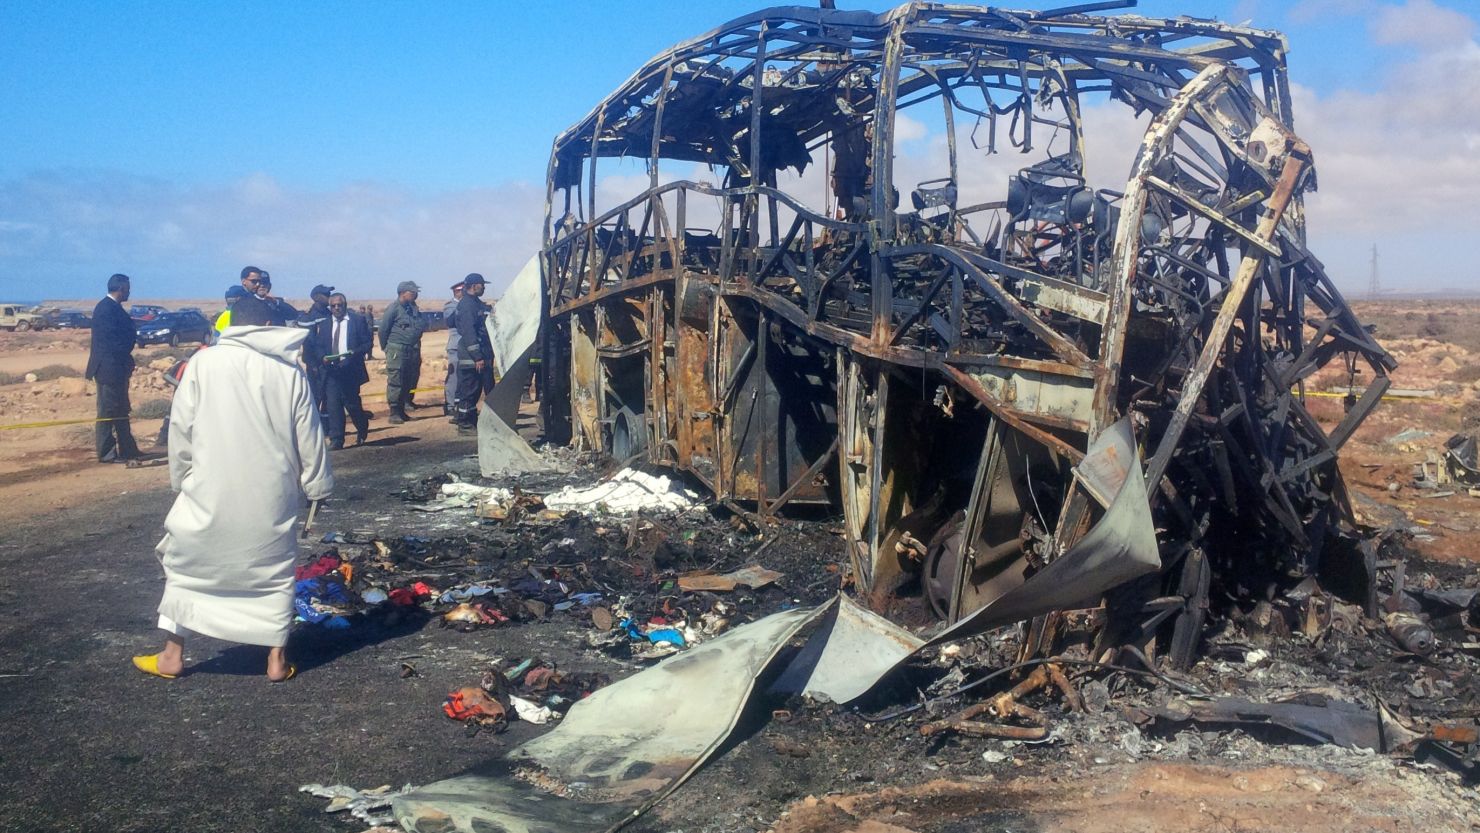 Officials check out the remains of a bus following a fire and fatal crash Friday near Tan-Tan, Morocco.